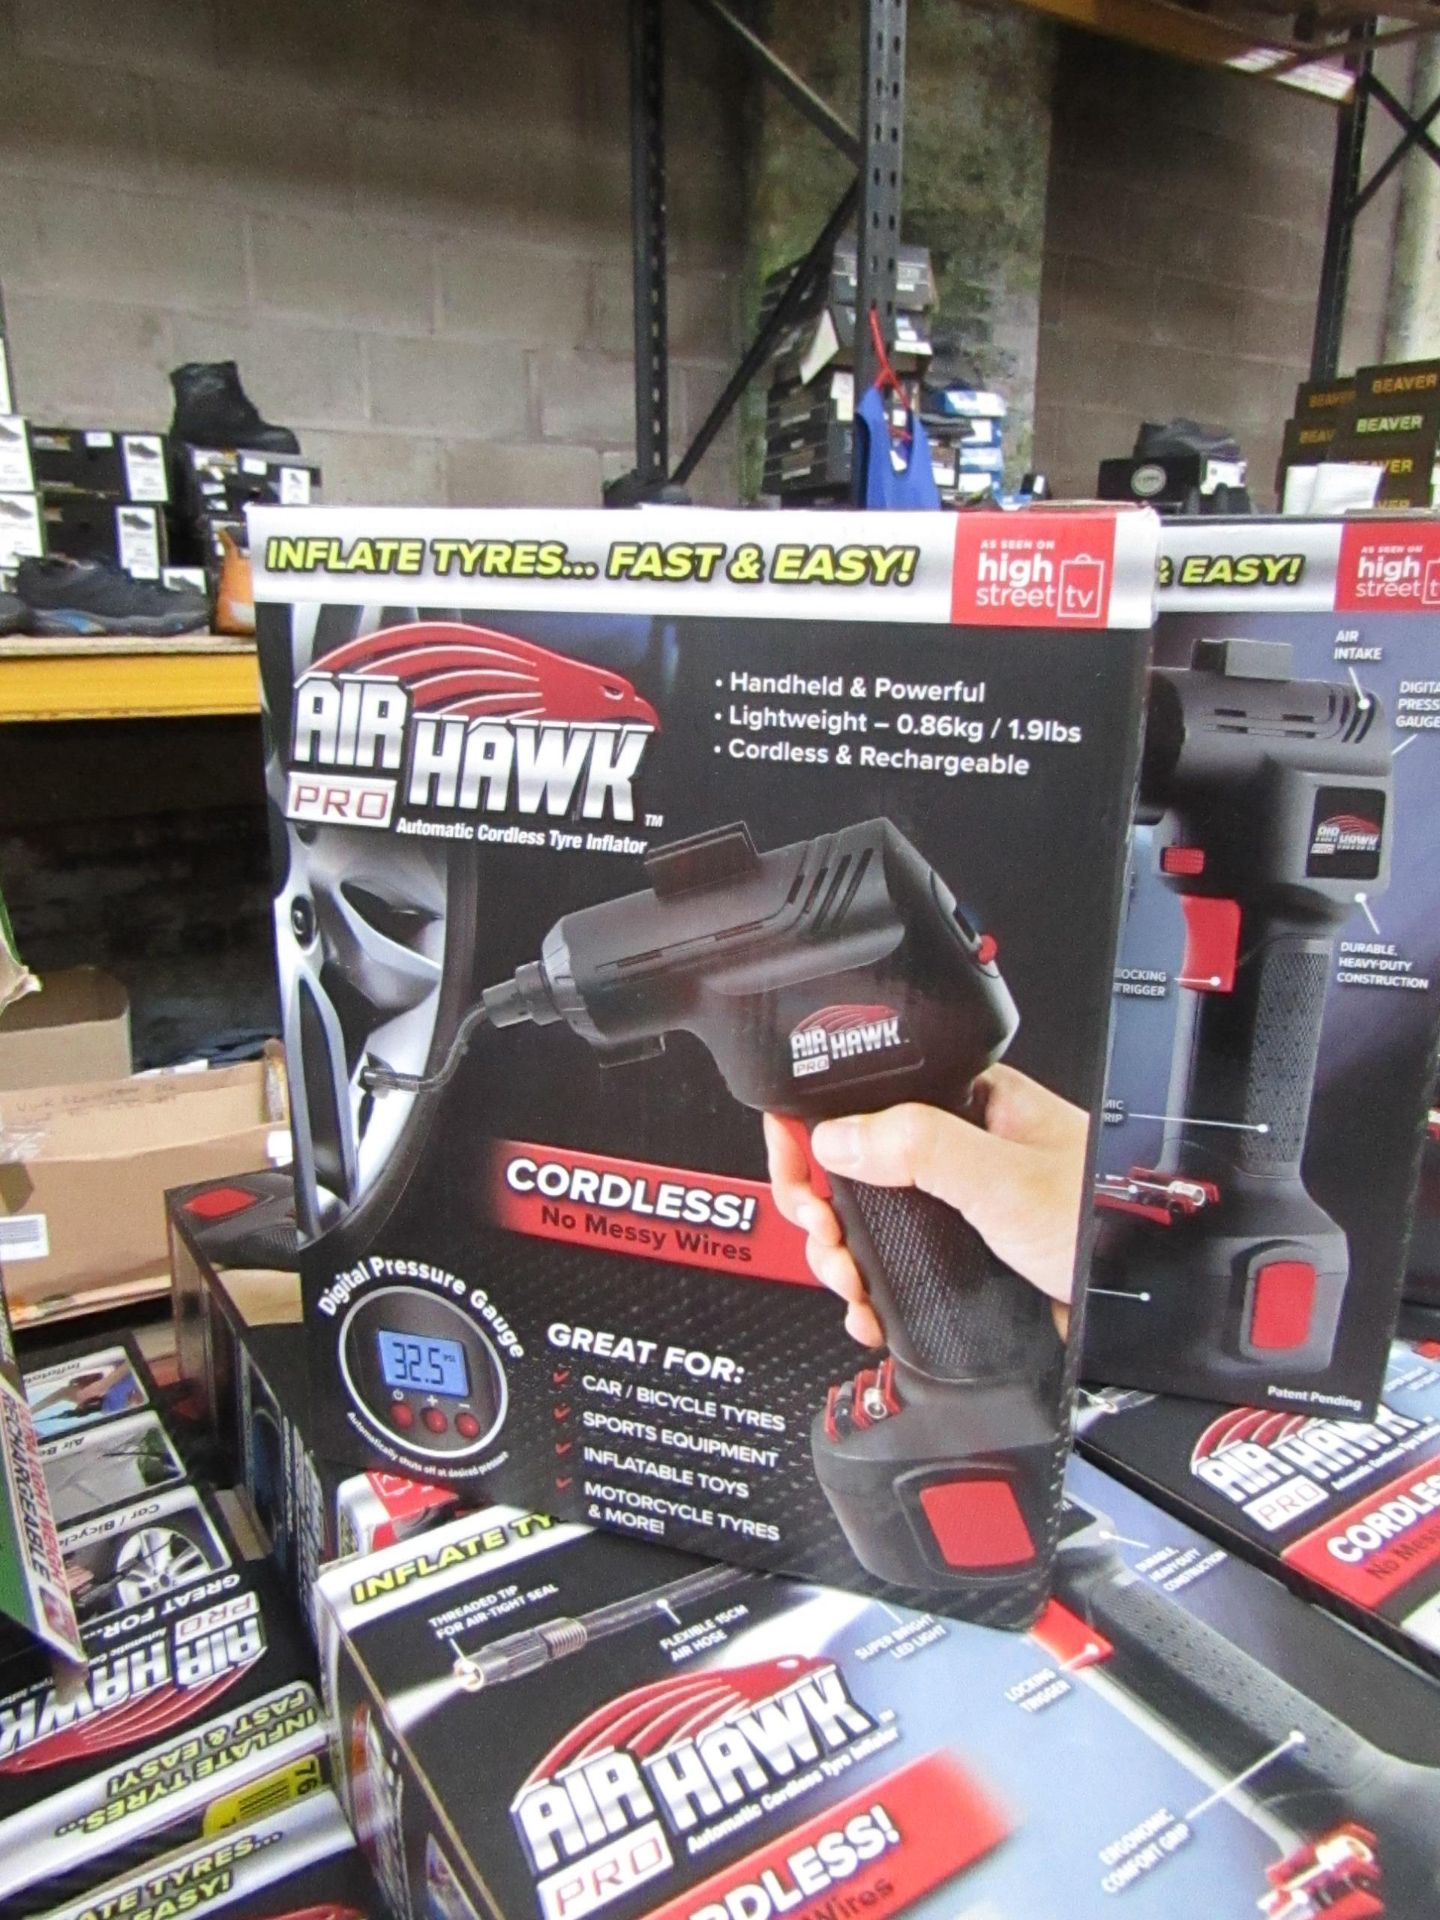 | 1x | Air Hawk Pro Cordless hand held compressor | tested working and boxed | no online re-sale |